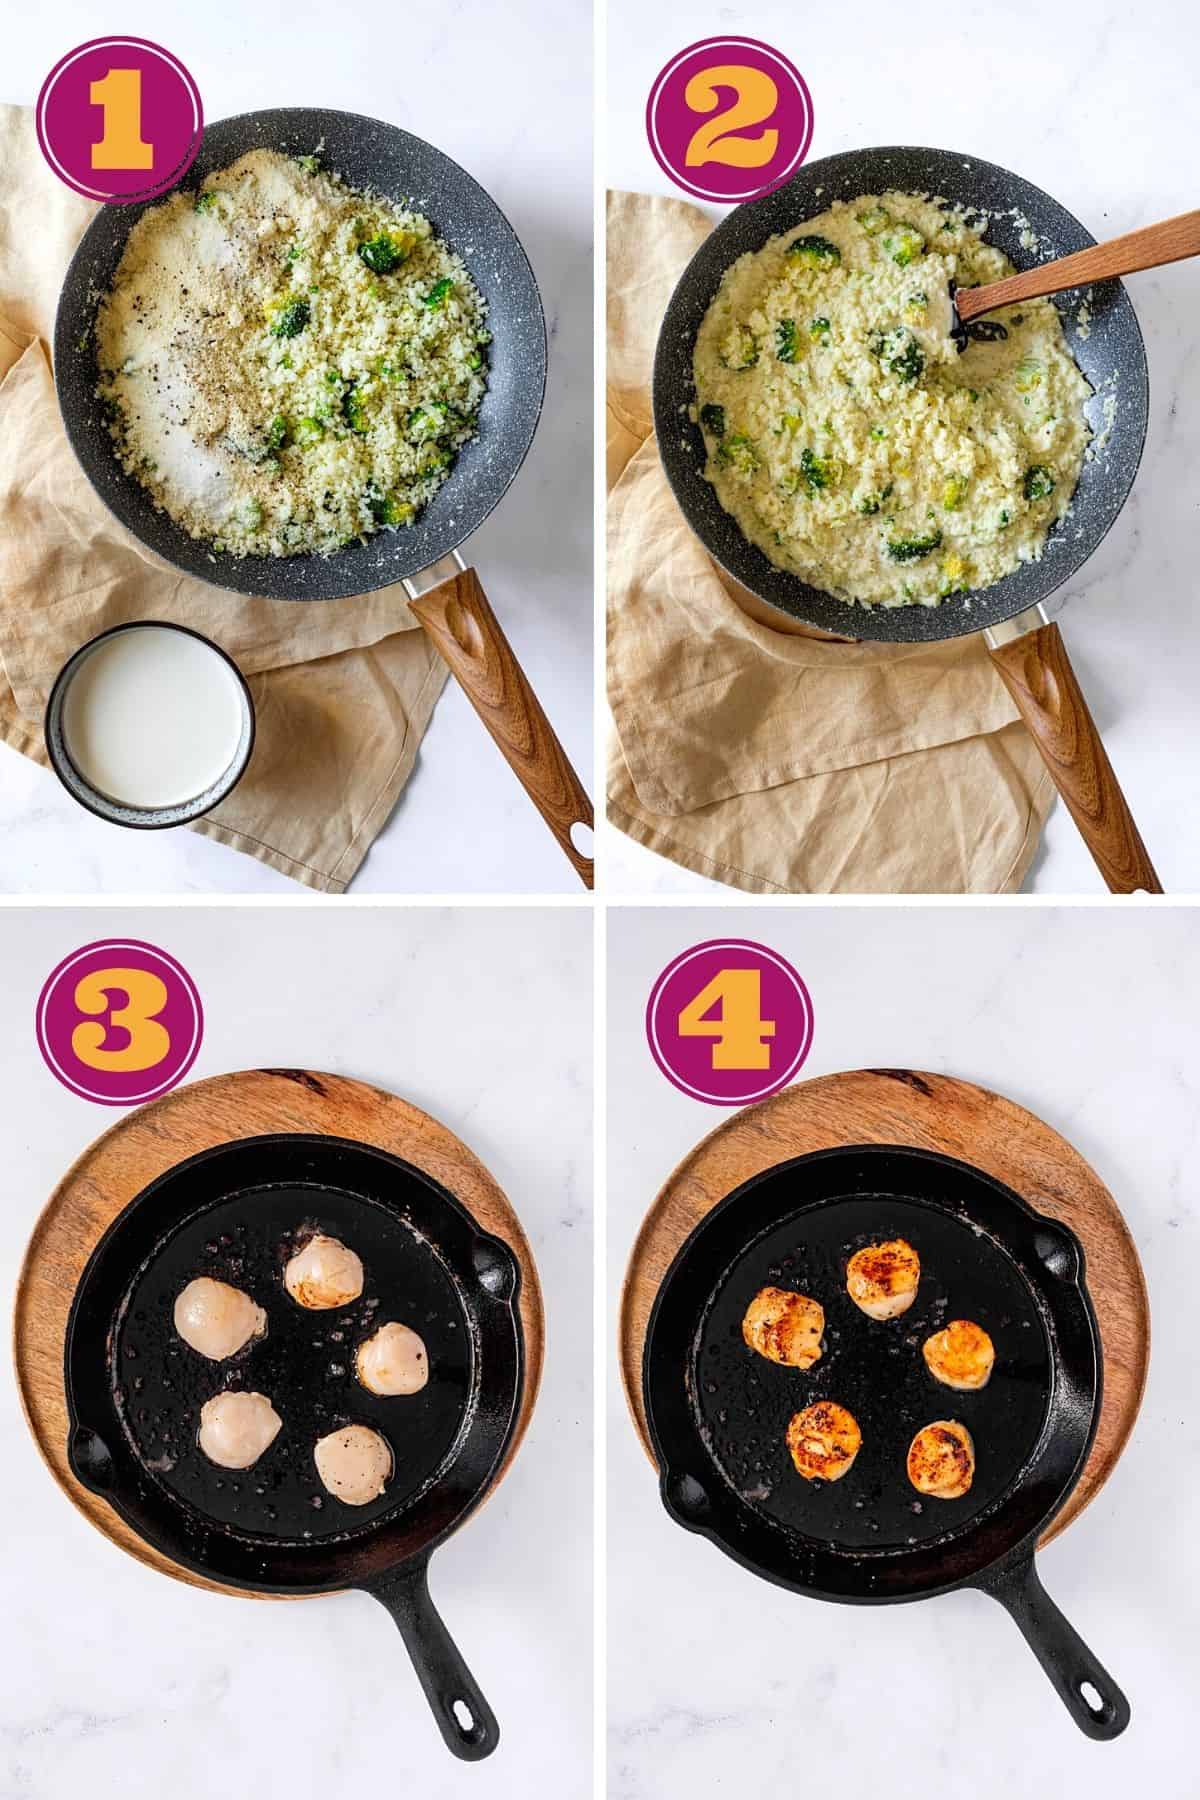 Seared Scallops & Cauliflower Risotto Step by Step cooking process